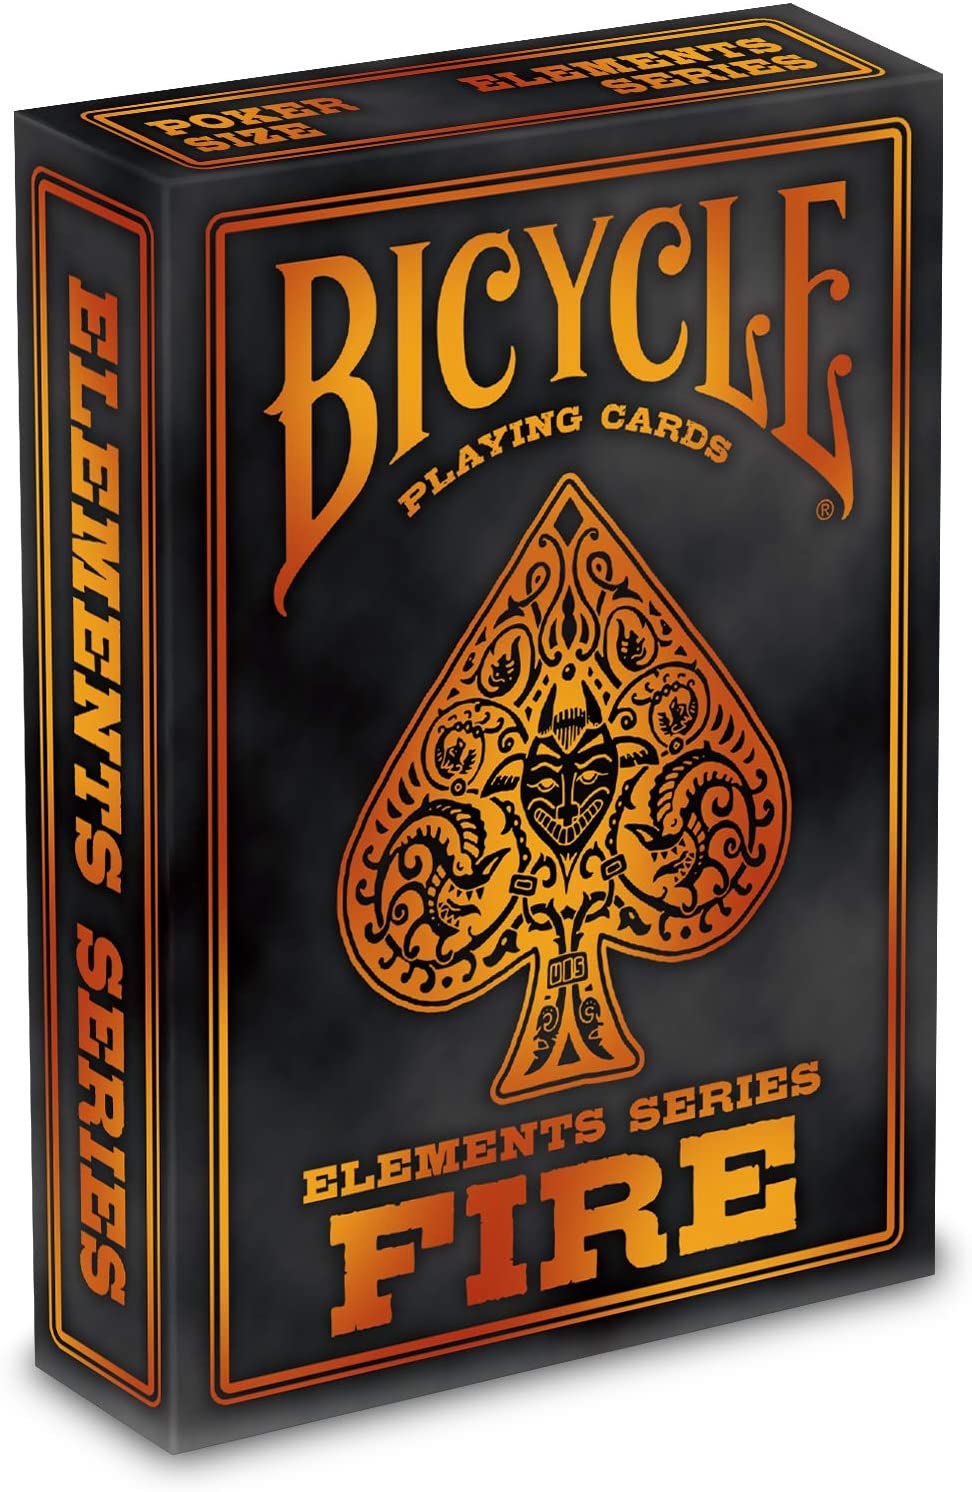 Bicycle® Cards - Fire